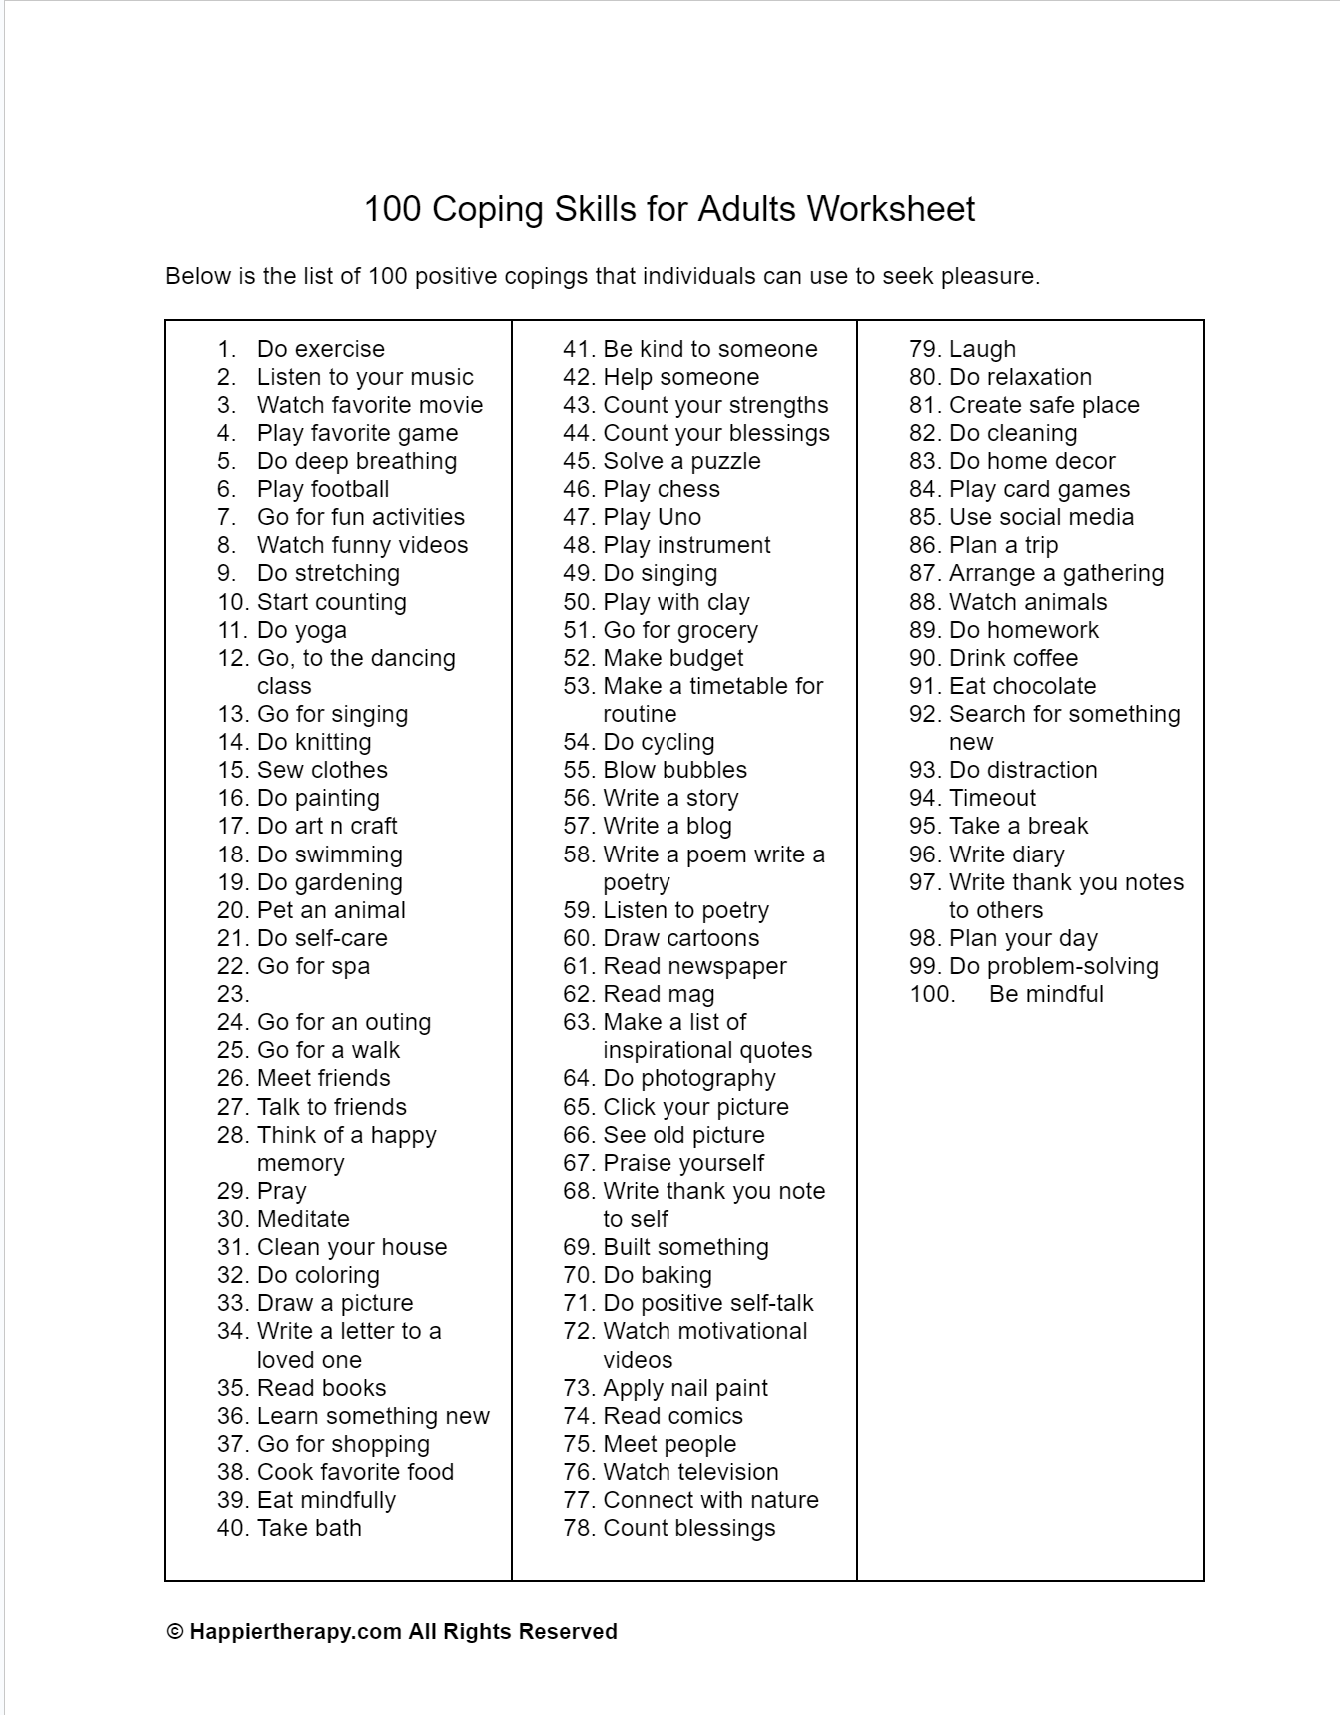 100 Coping Skills For Adults Worksheet HappierTHERAPY